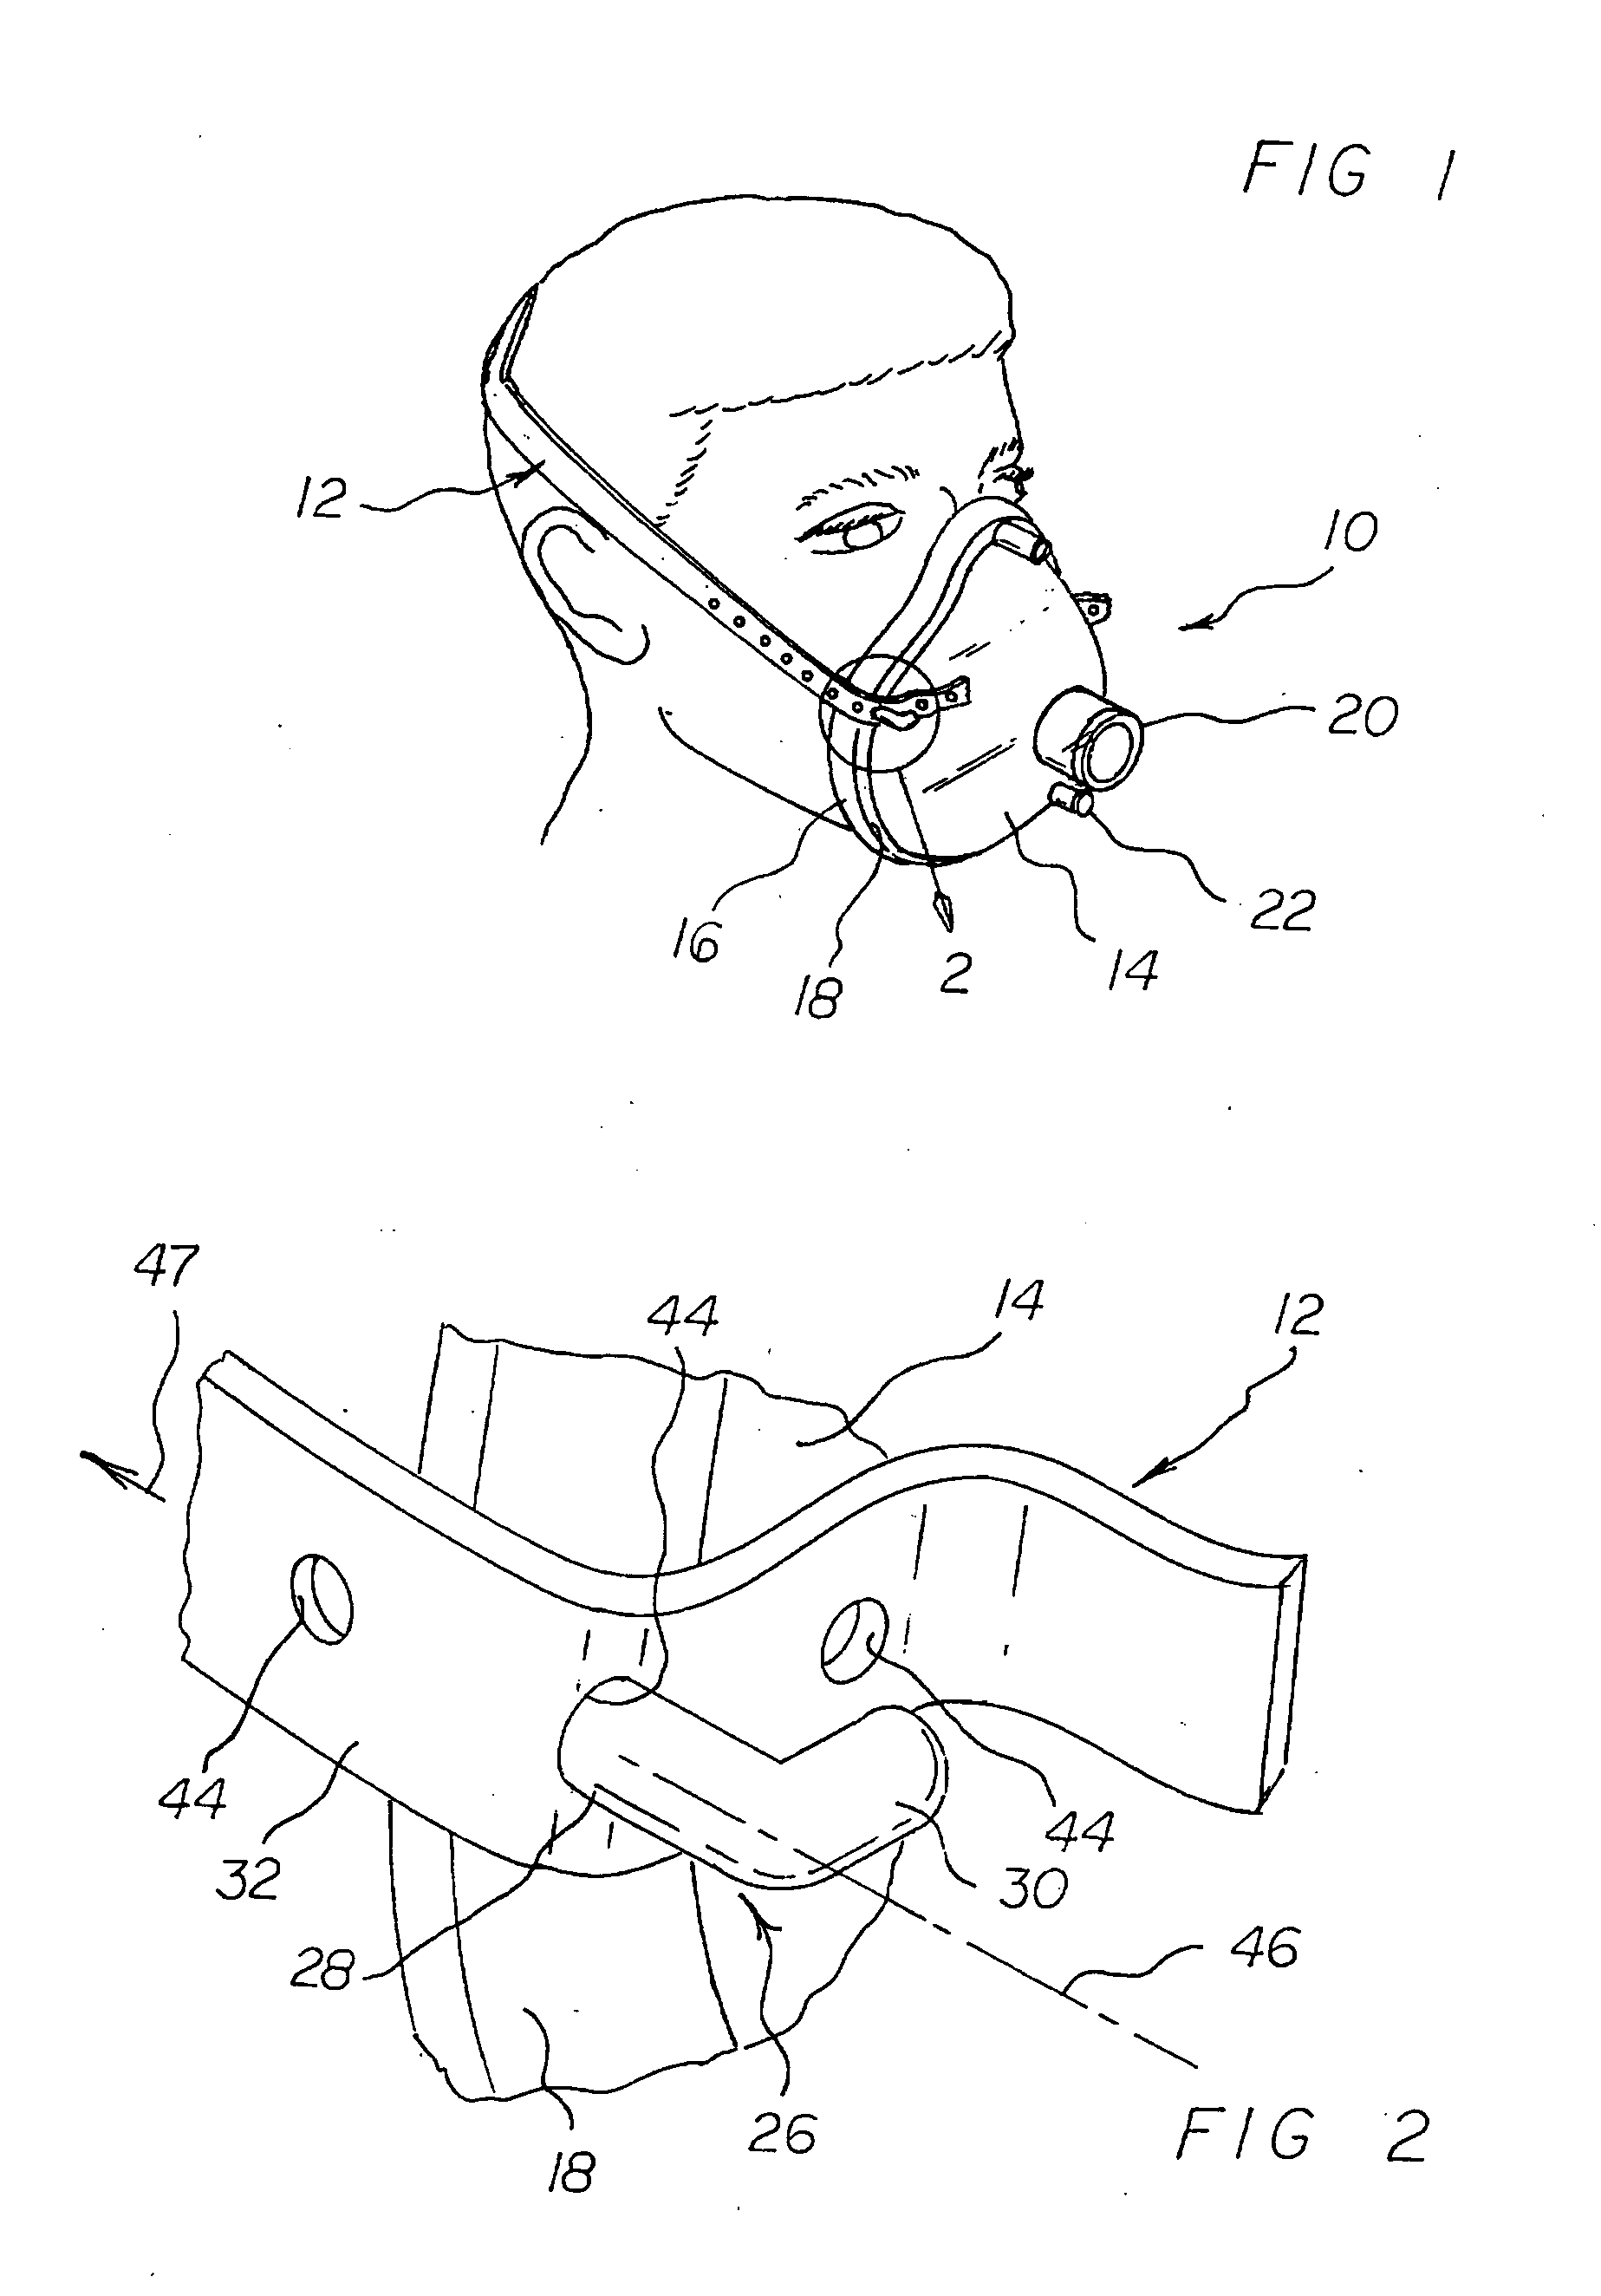 Respiratory face mask and headstrap assembly